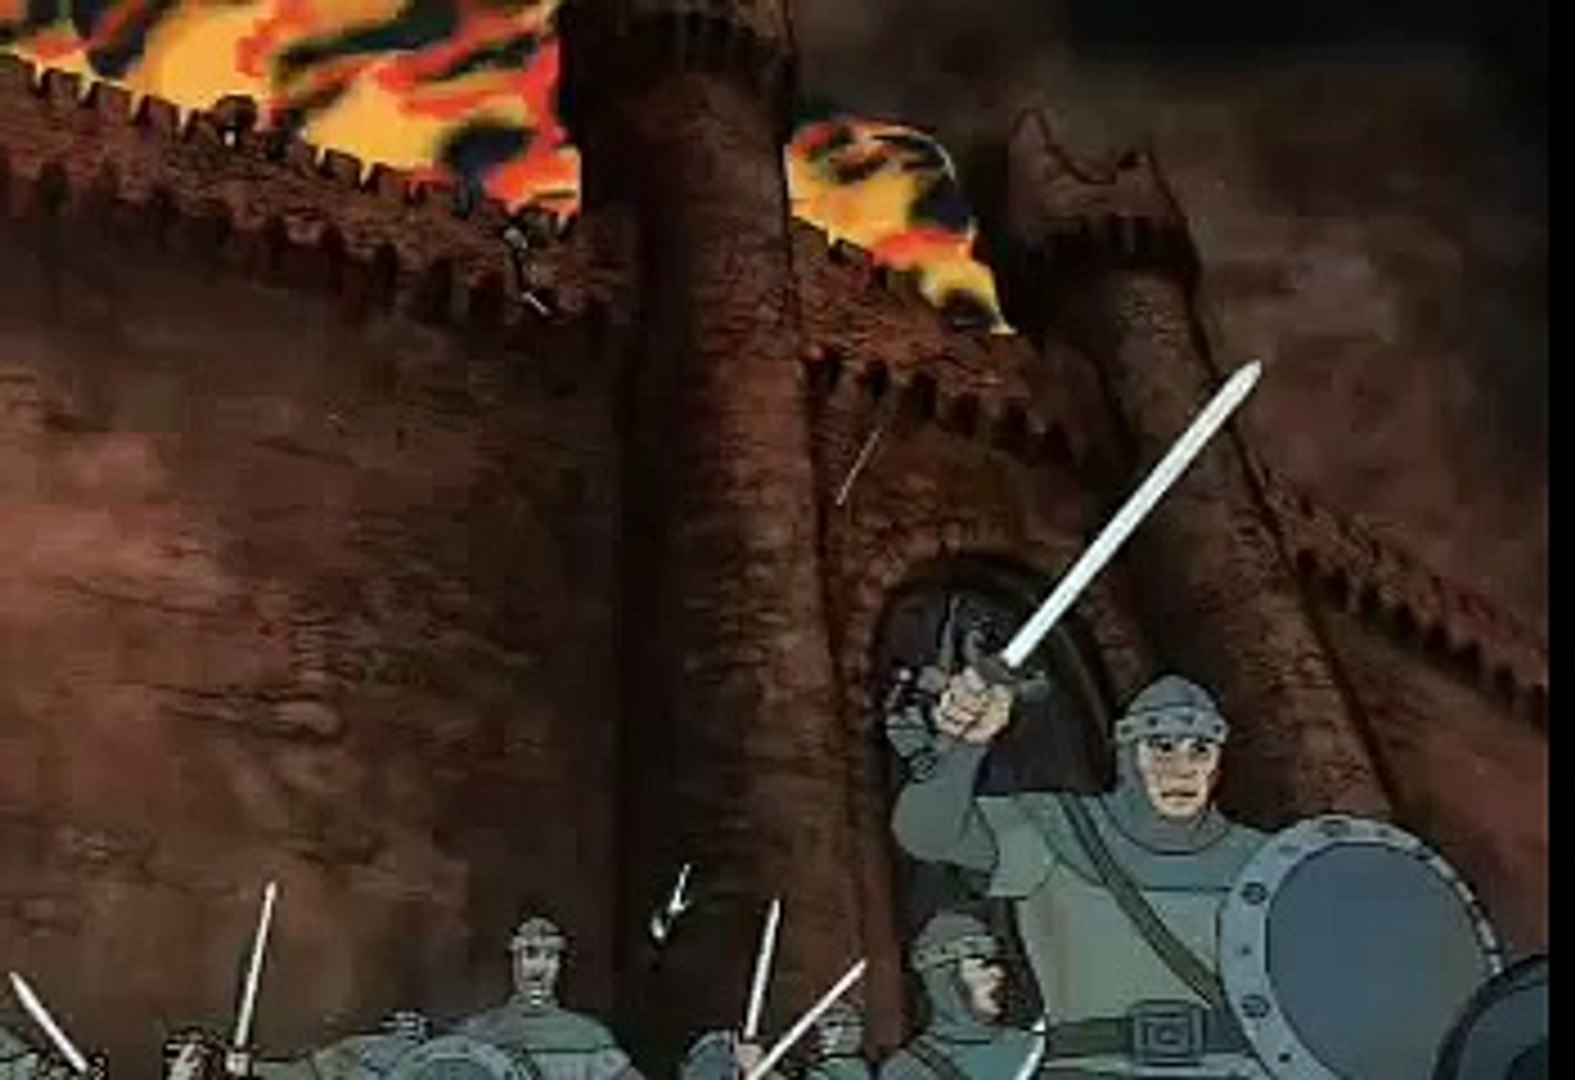 The Lord of the Rings (2003) - Battle for Minas Tirith Beggins